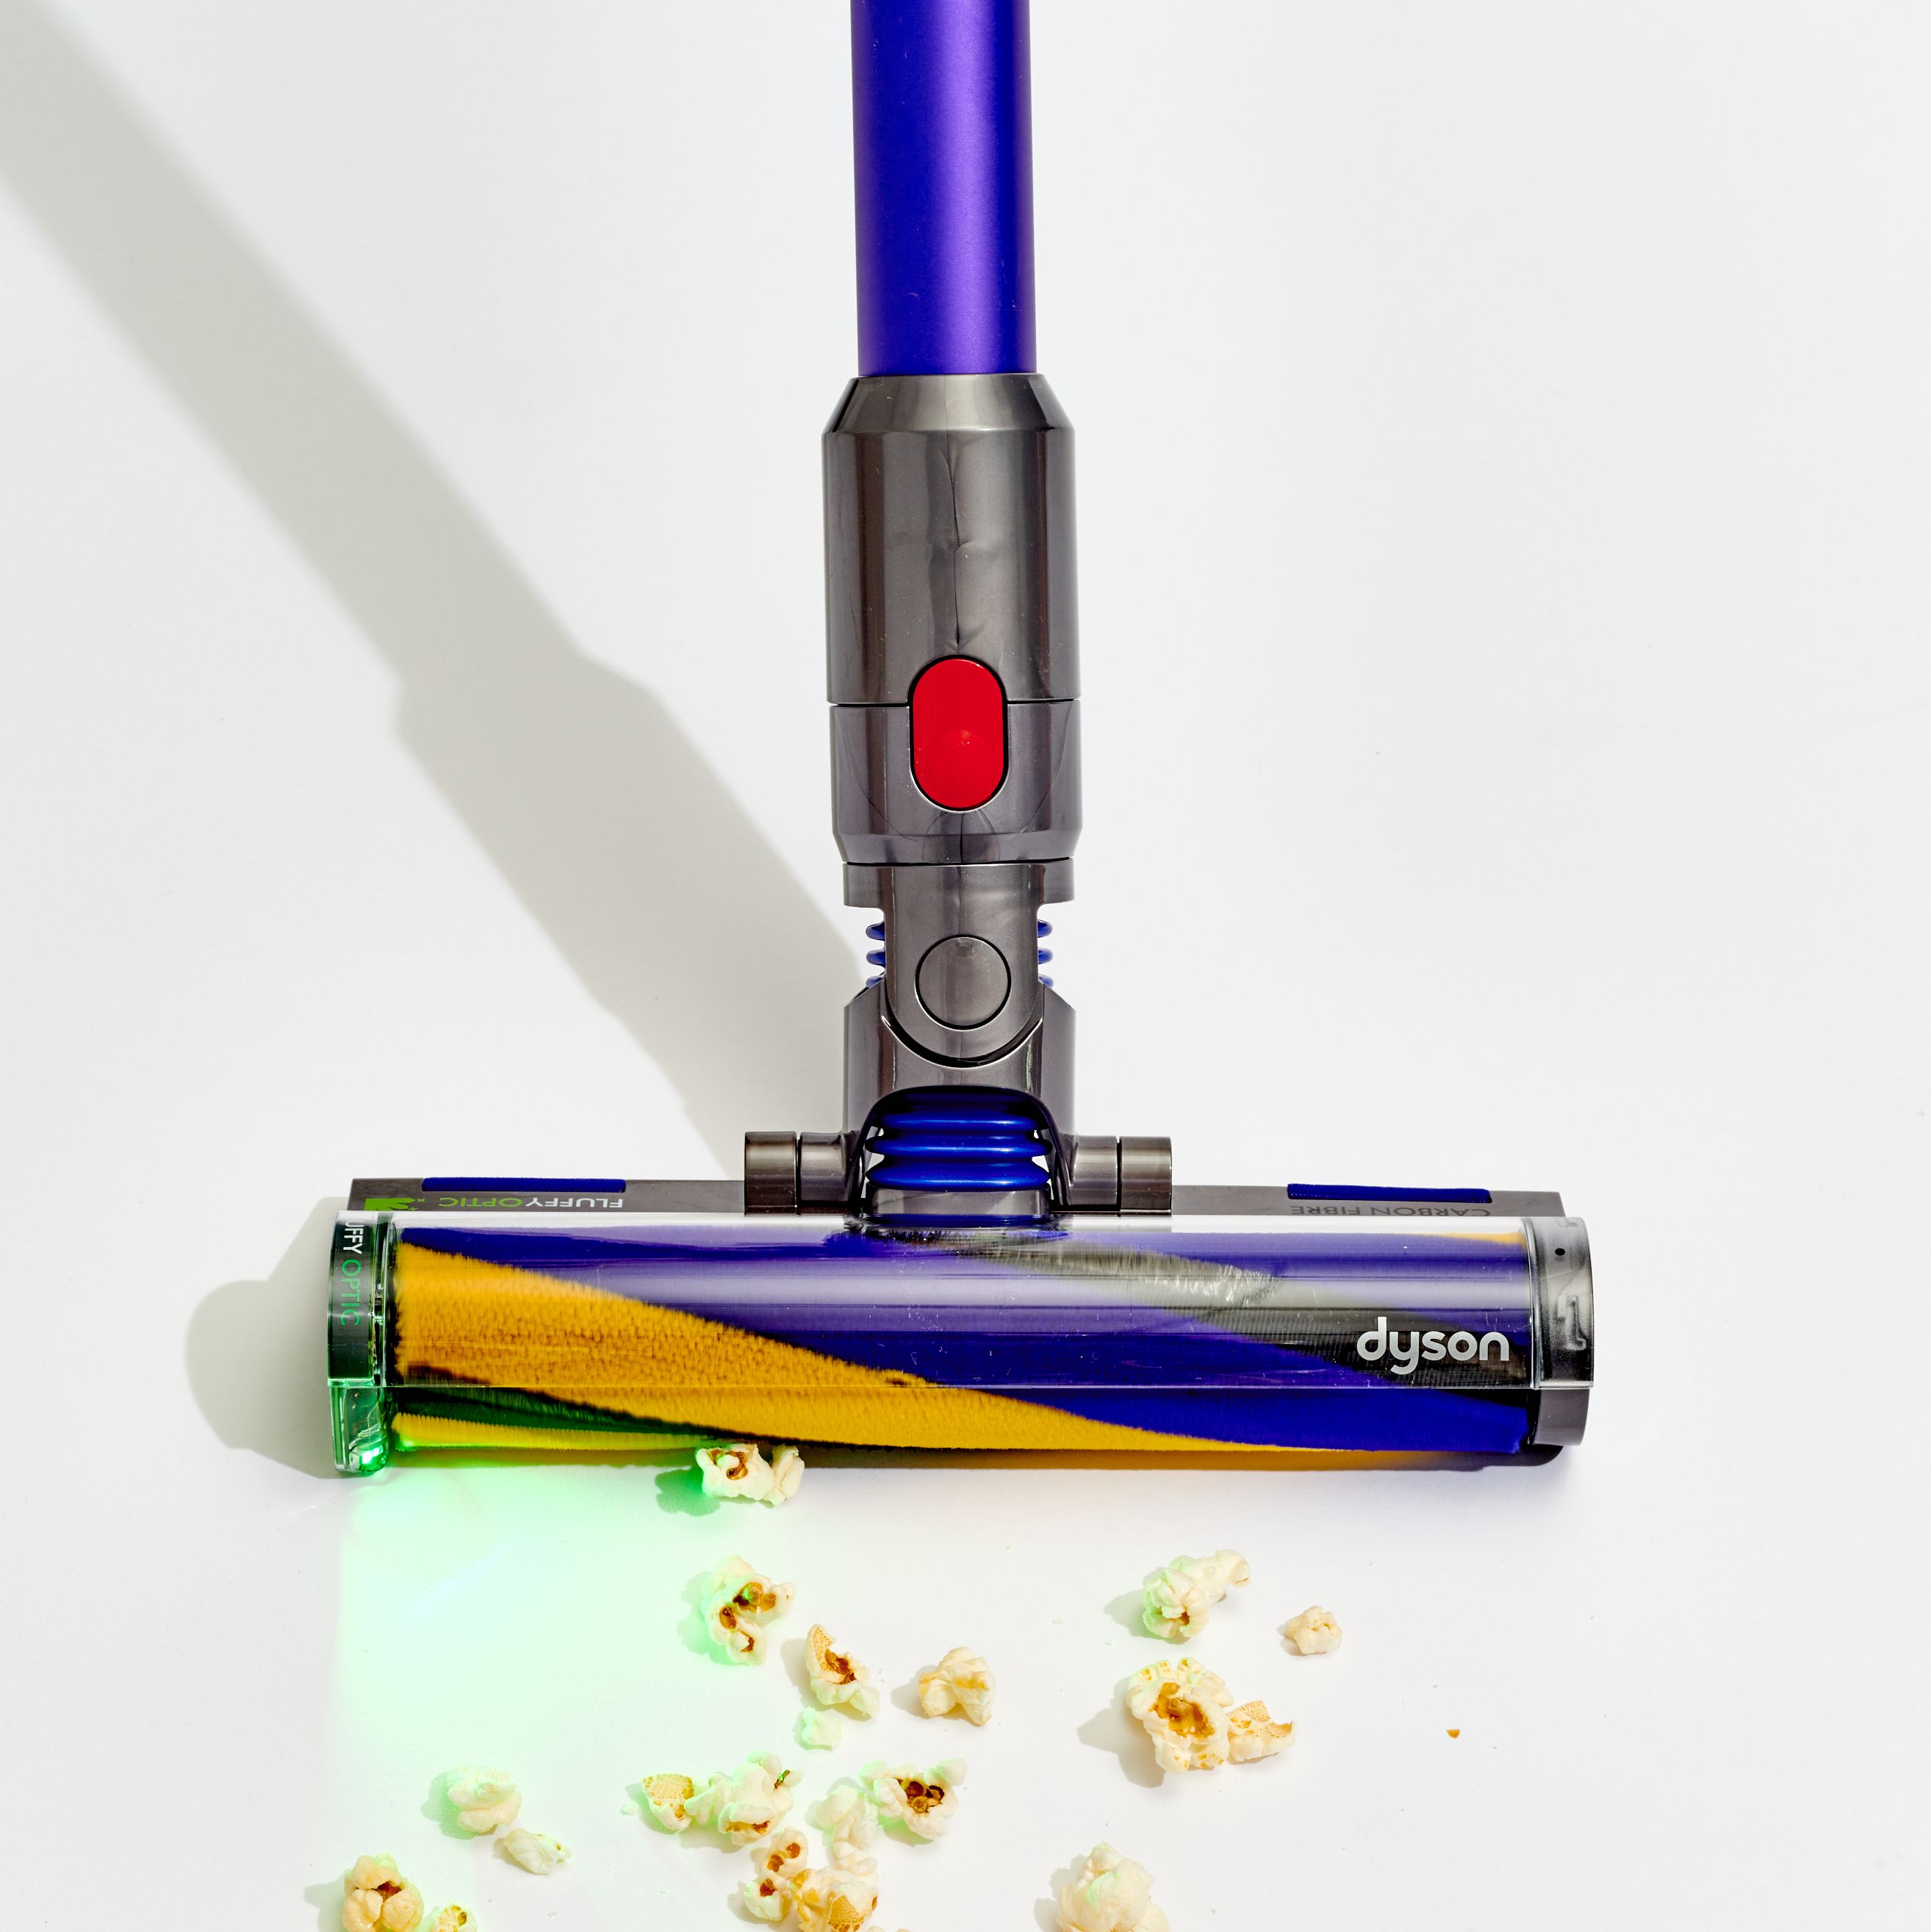 Dyson Is Undefeated. The Gen5 Vacuum Proves Why.